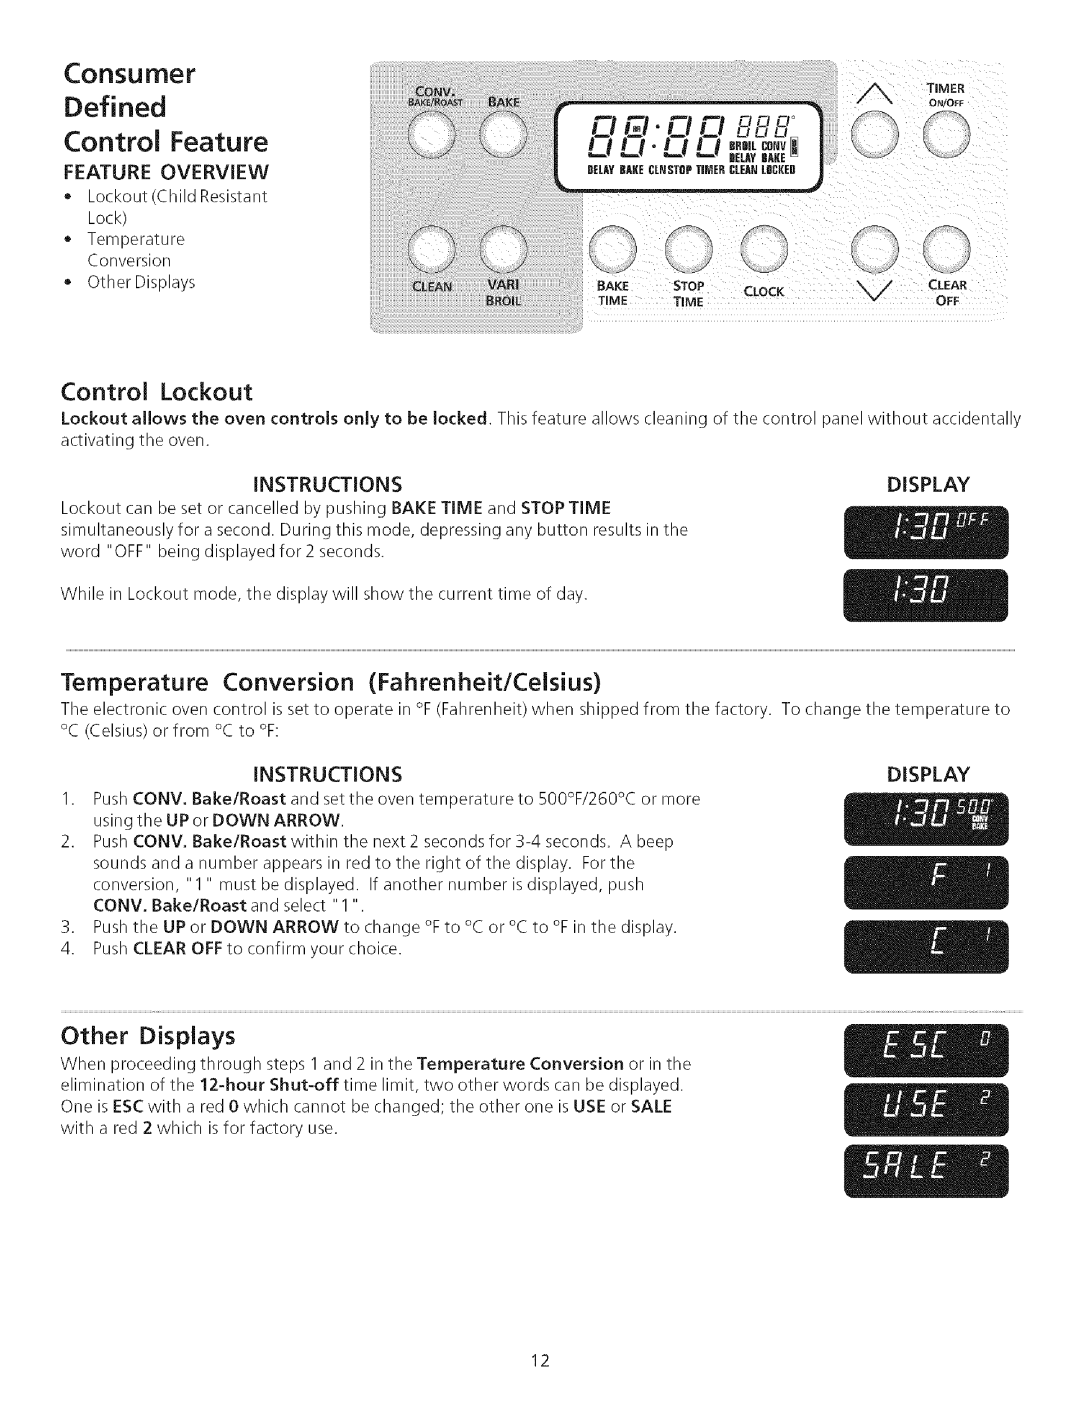 Kenmore 790.75503 manual Defined Control Feature, Other Displays, Feature Overview, Instructions 